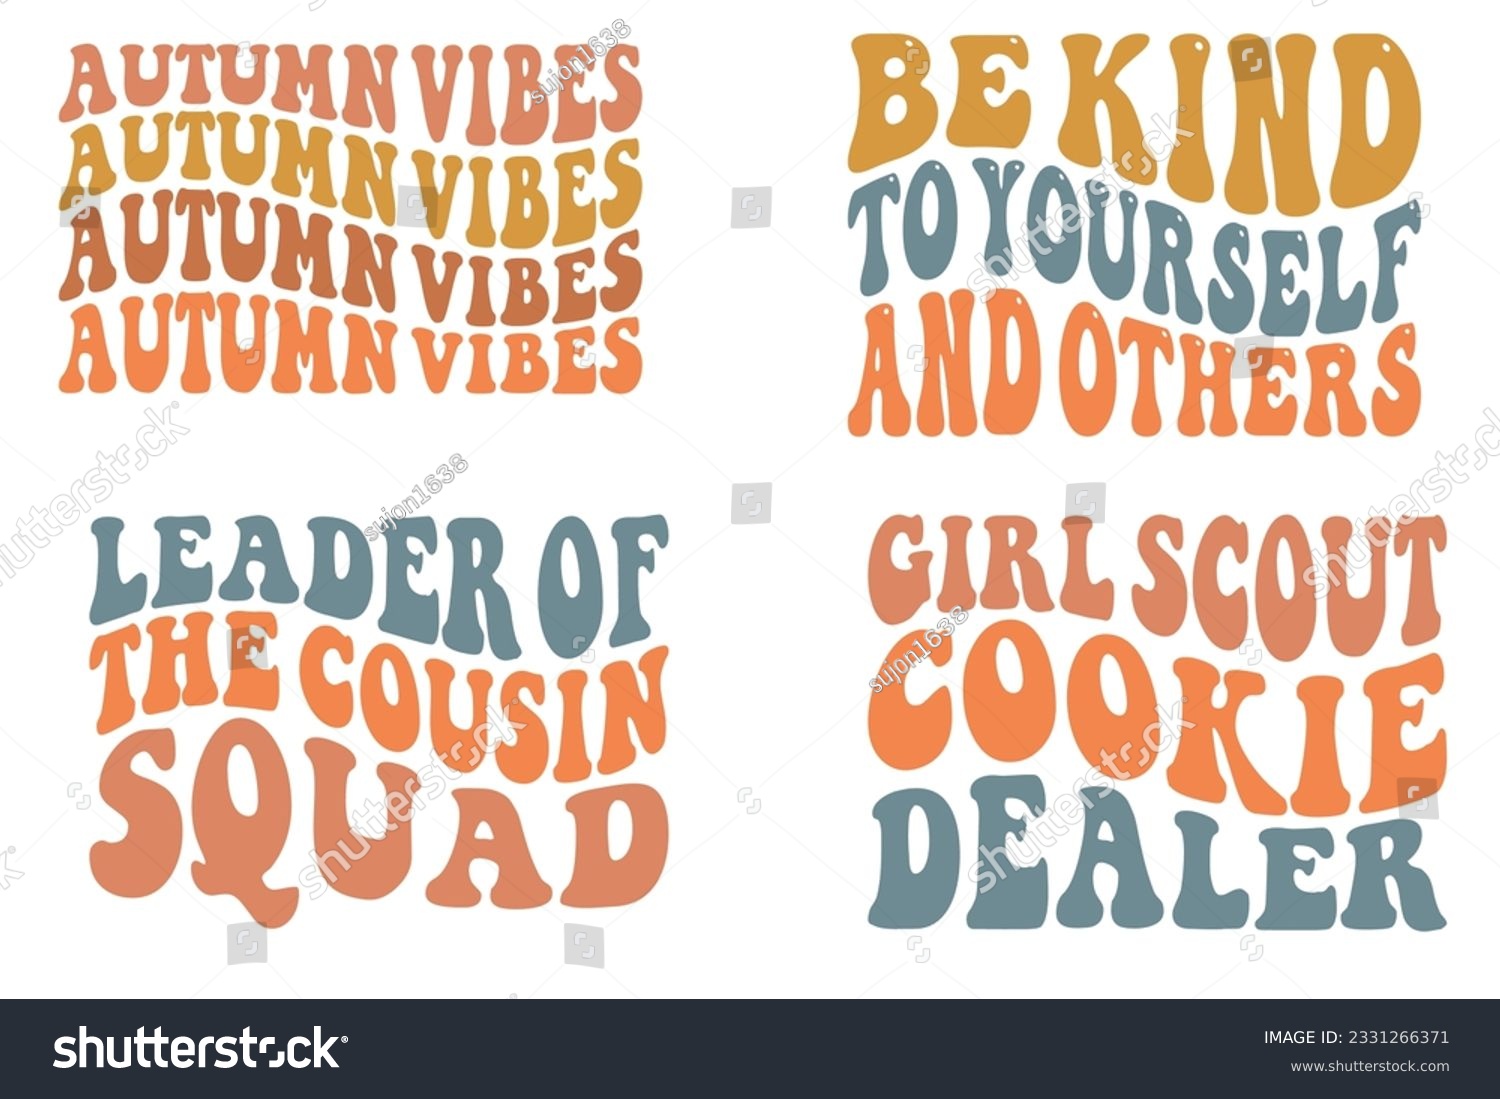 SVG of Autumn Vibes, Be Kind to Yourself and Others, Leader of the Cousin Squad, Girl Scout Cookie Dealer retro wavy SVG bundle t-shirt designs svg